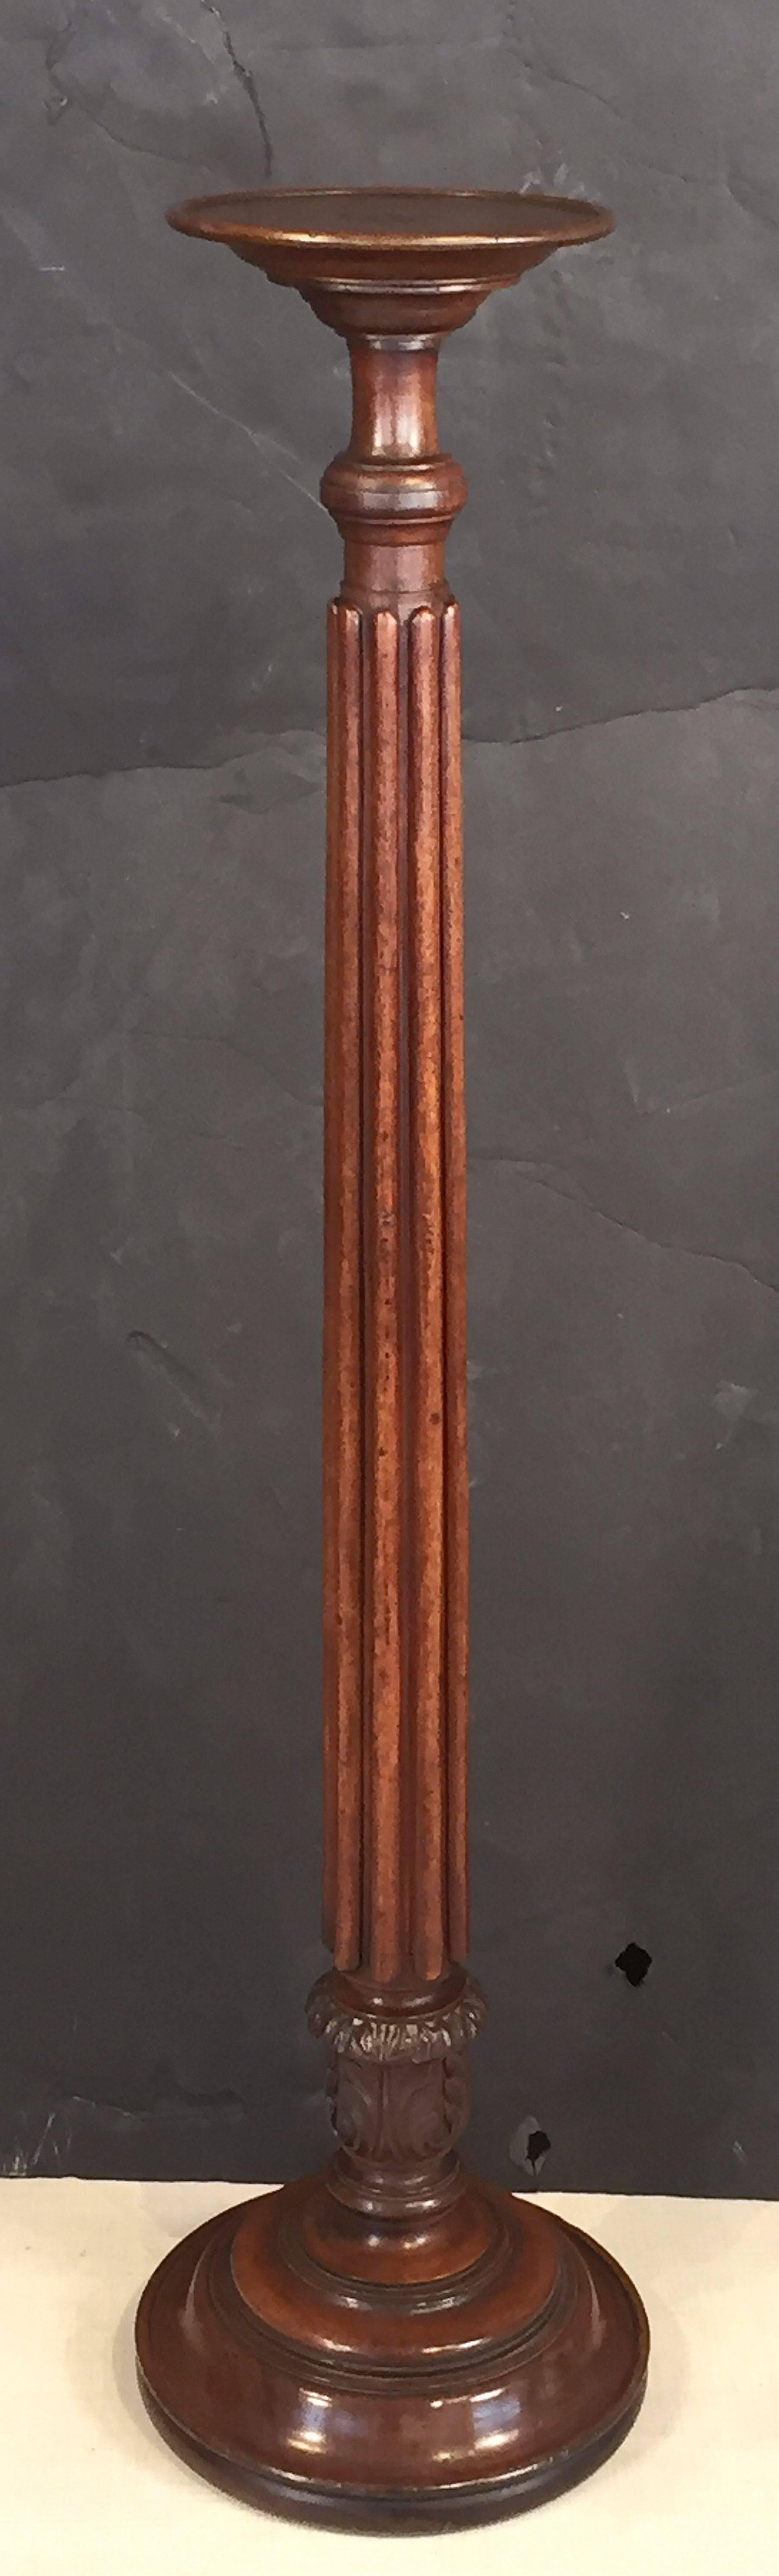 A fine English torchère (torchière) or column pedestal stand of mahogany - in the William IV style - featuring a moulded round top for candles or plants, turned column support, and raised round pedestal base with carved acanthus leaves design.